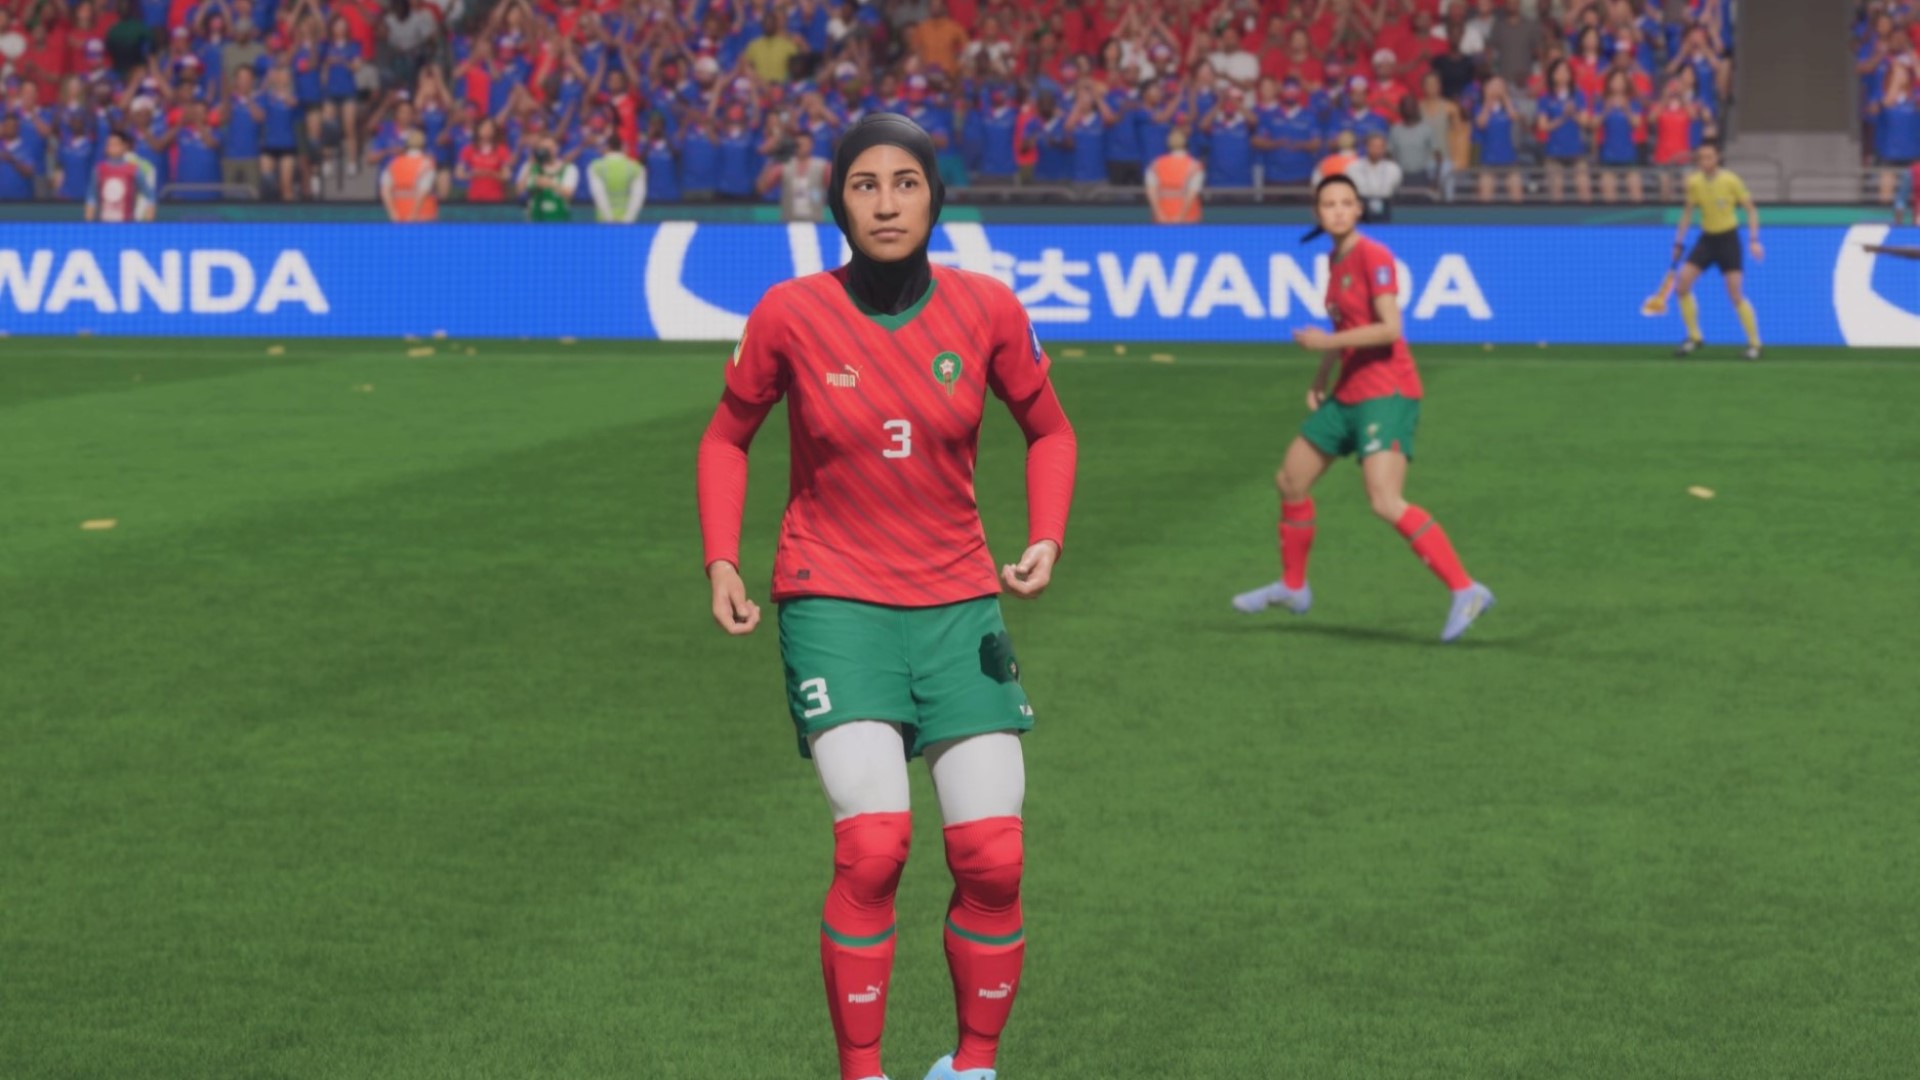 fifa-23-adds-hijab-wearing-player-in-franchise-first-techradar